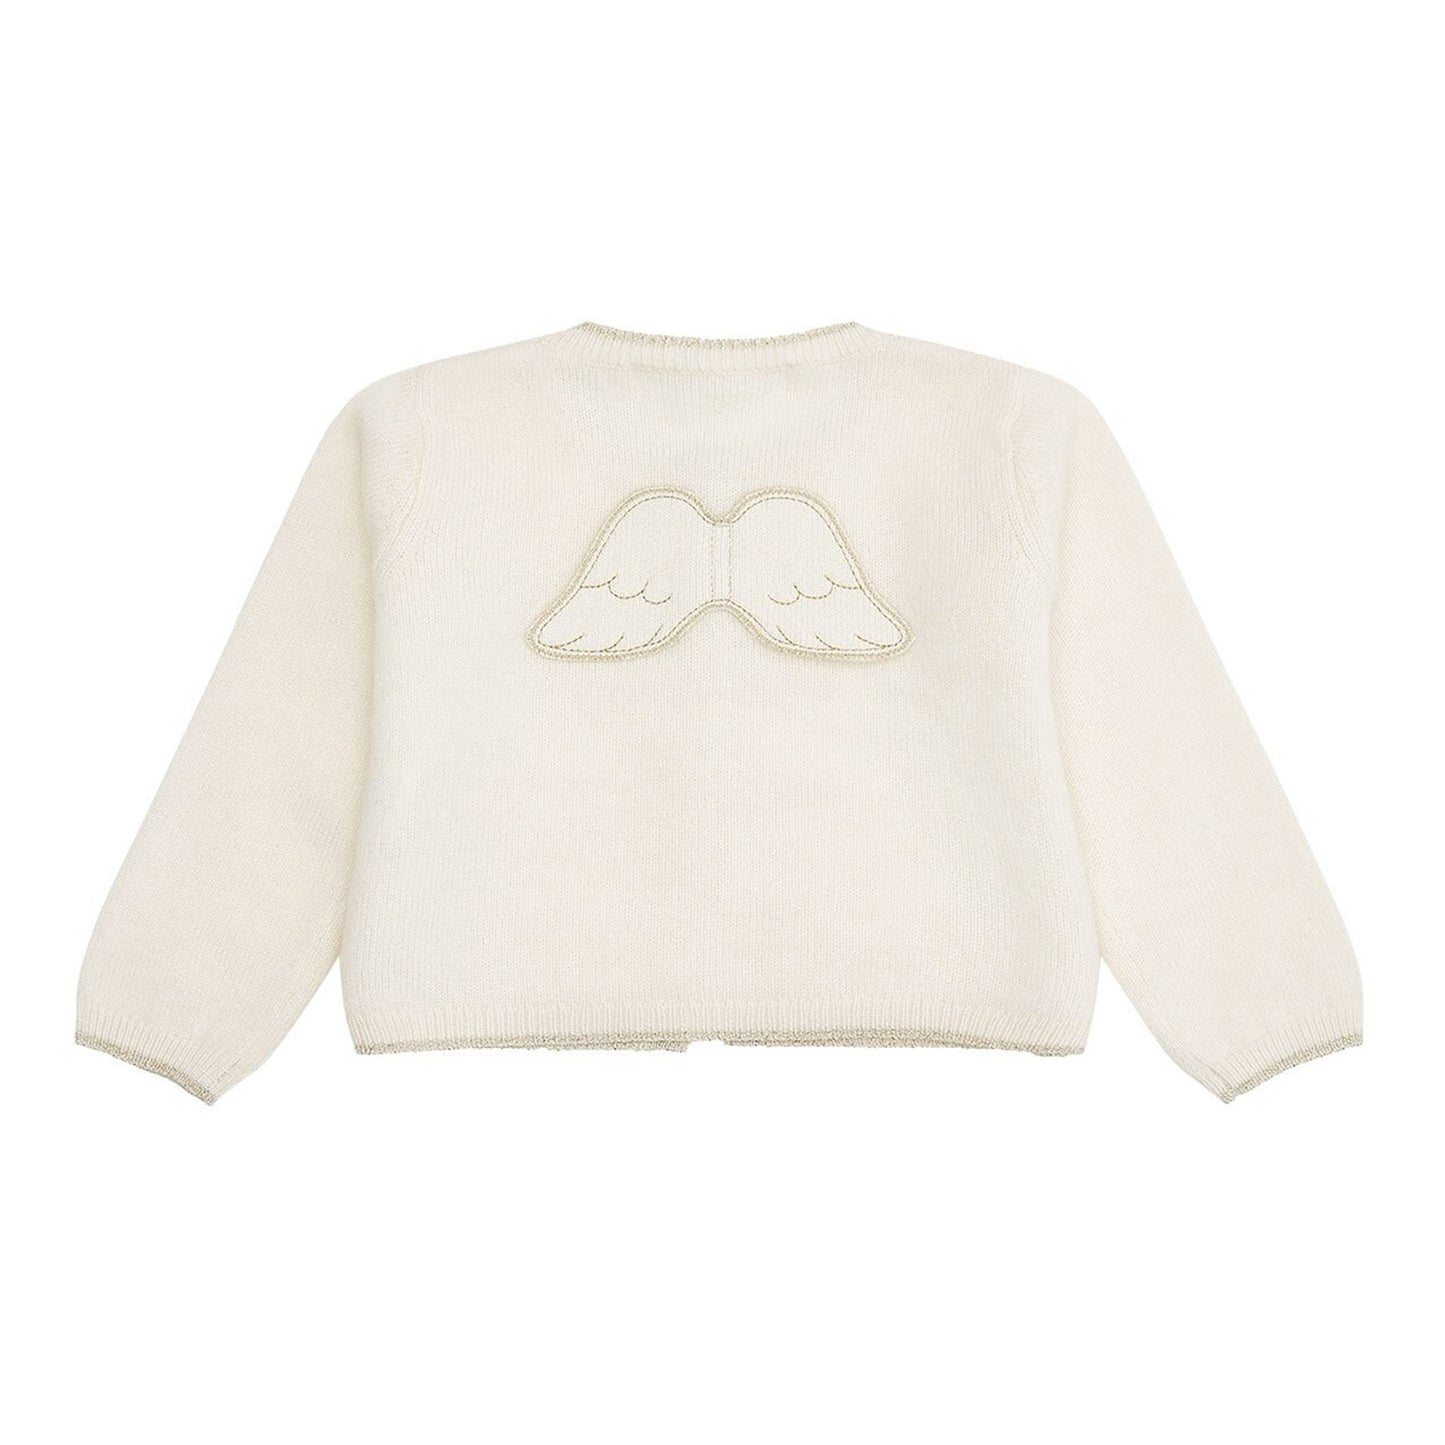 Marie-Chantal Signature Cashmere Angel Wing™  Baby Gift Set